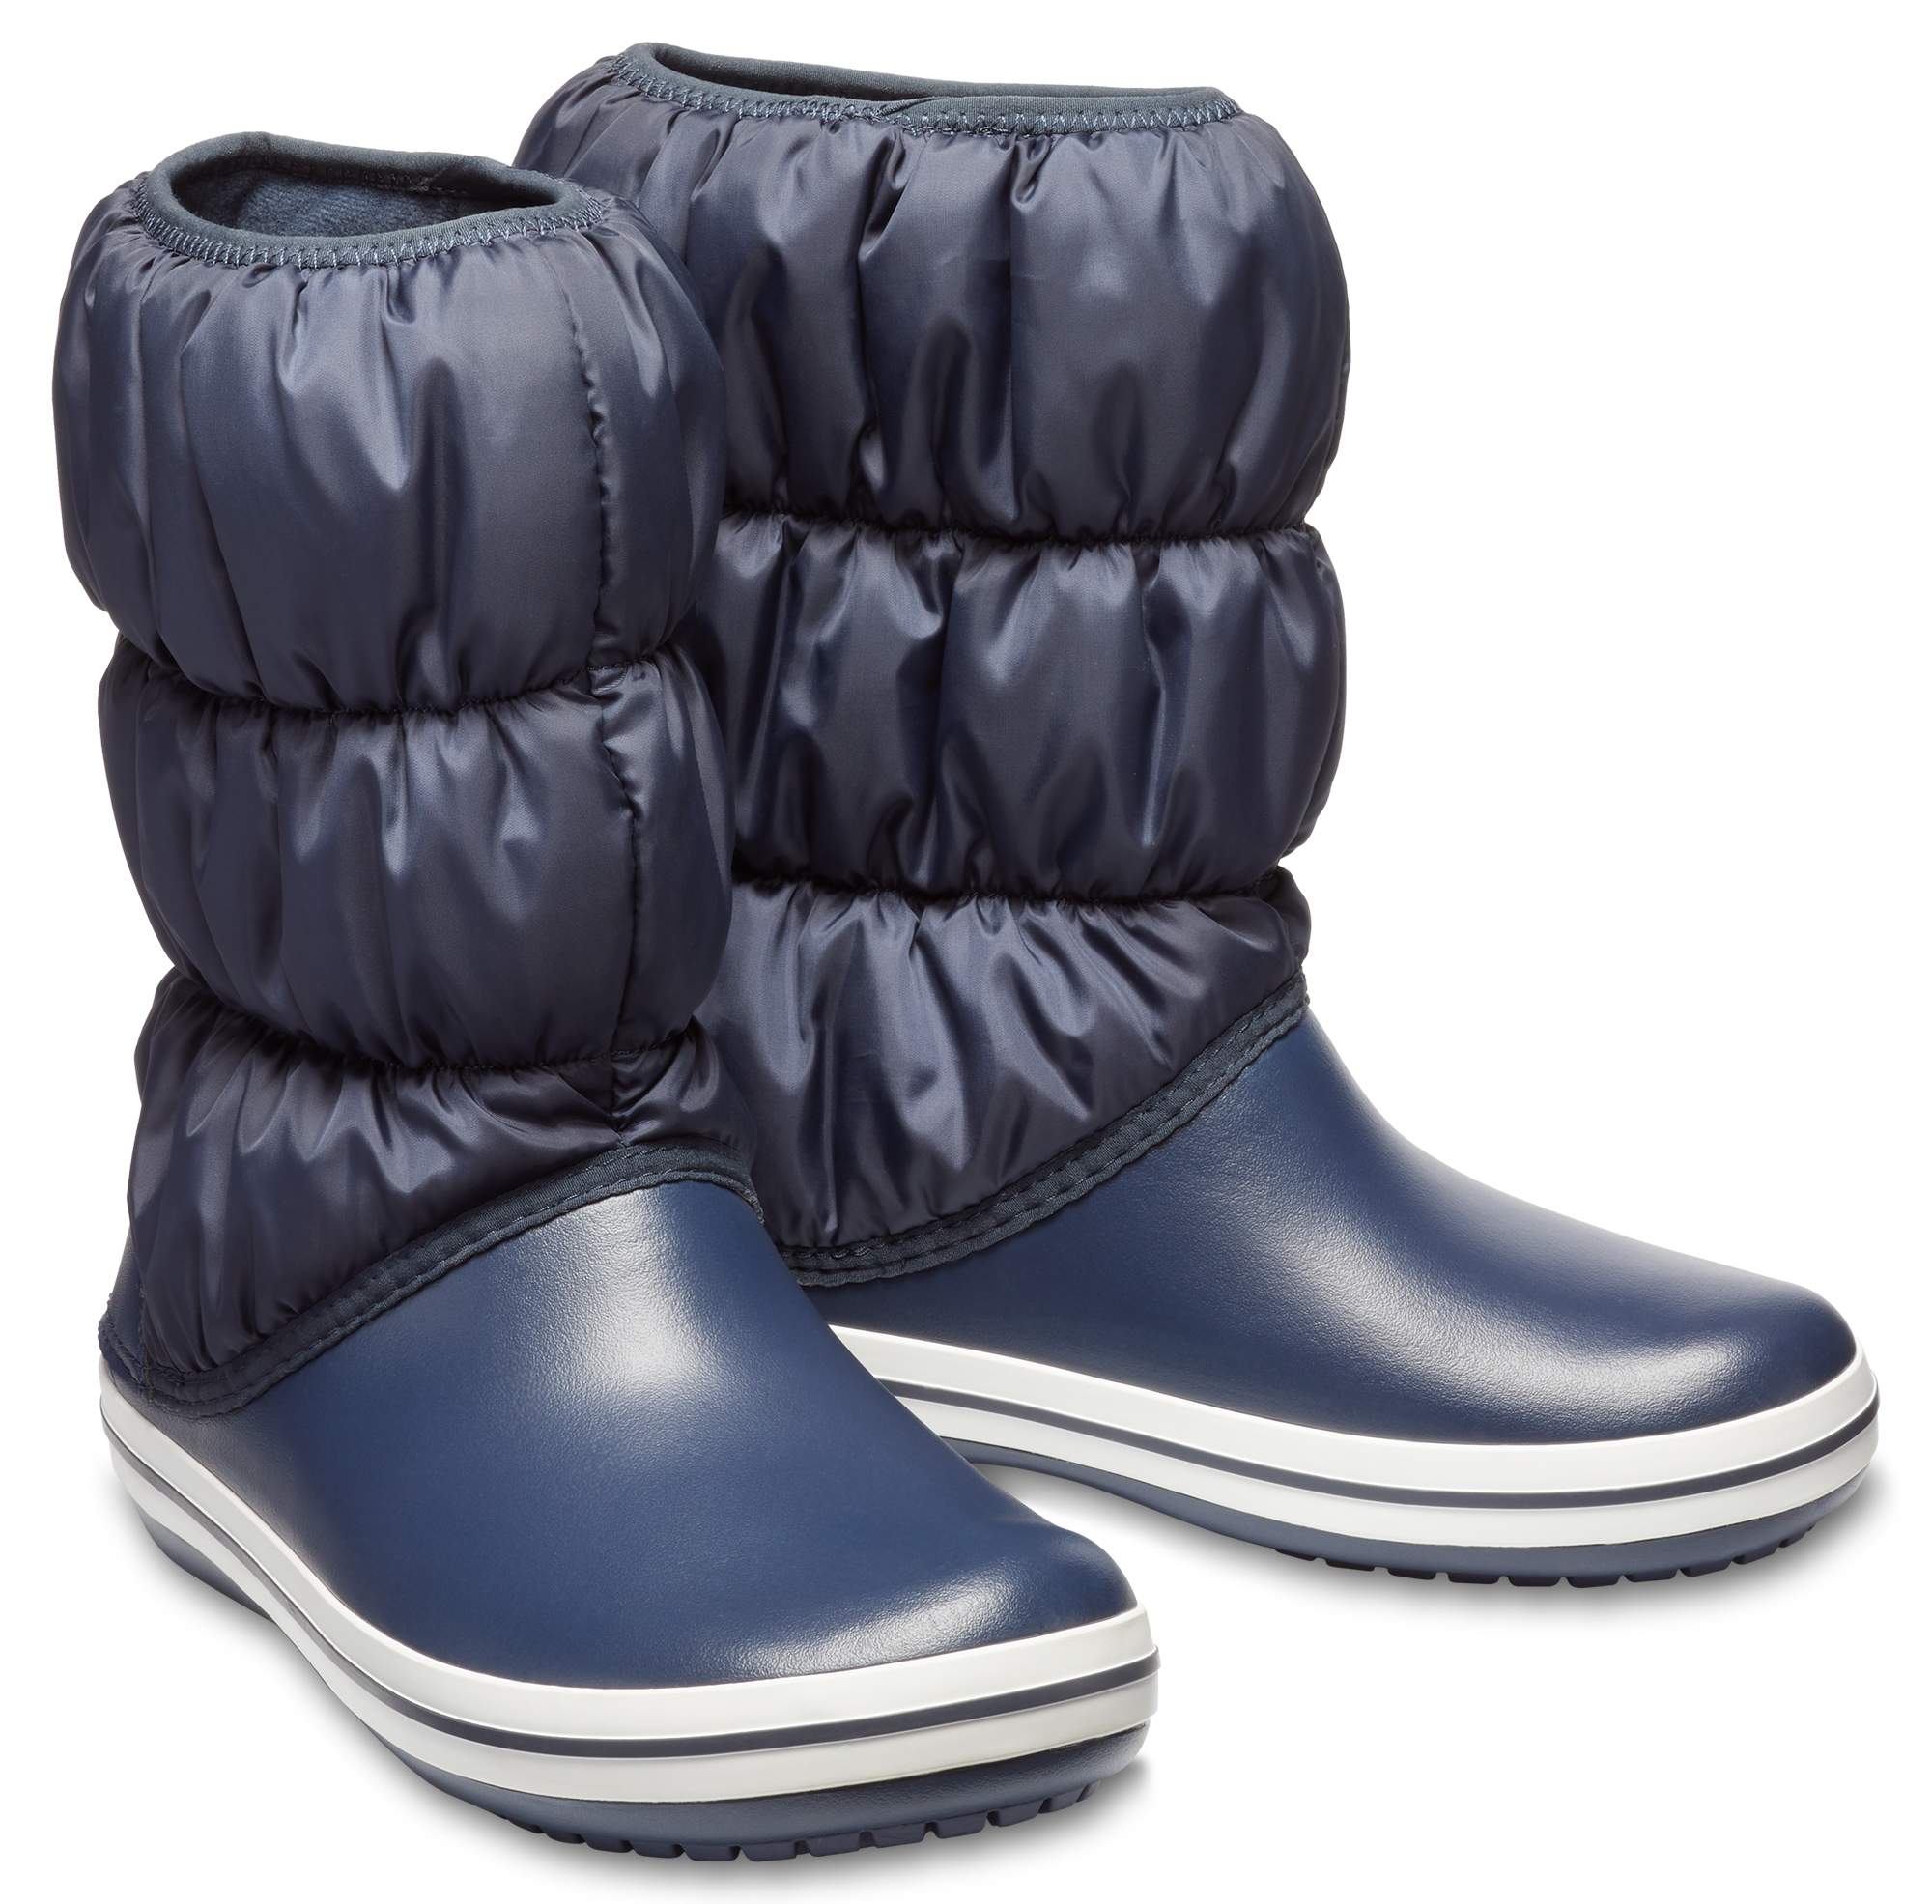 crocs boots for winter